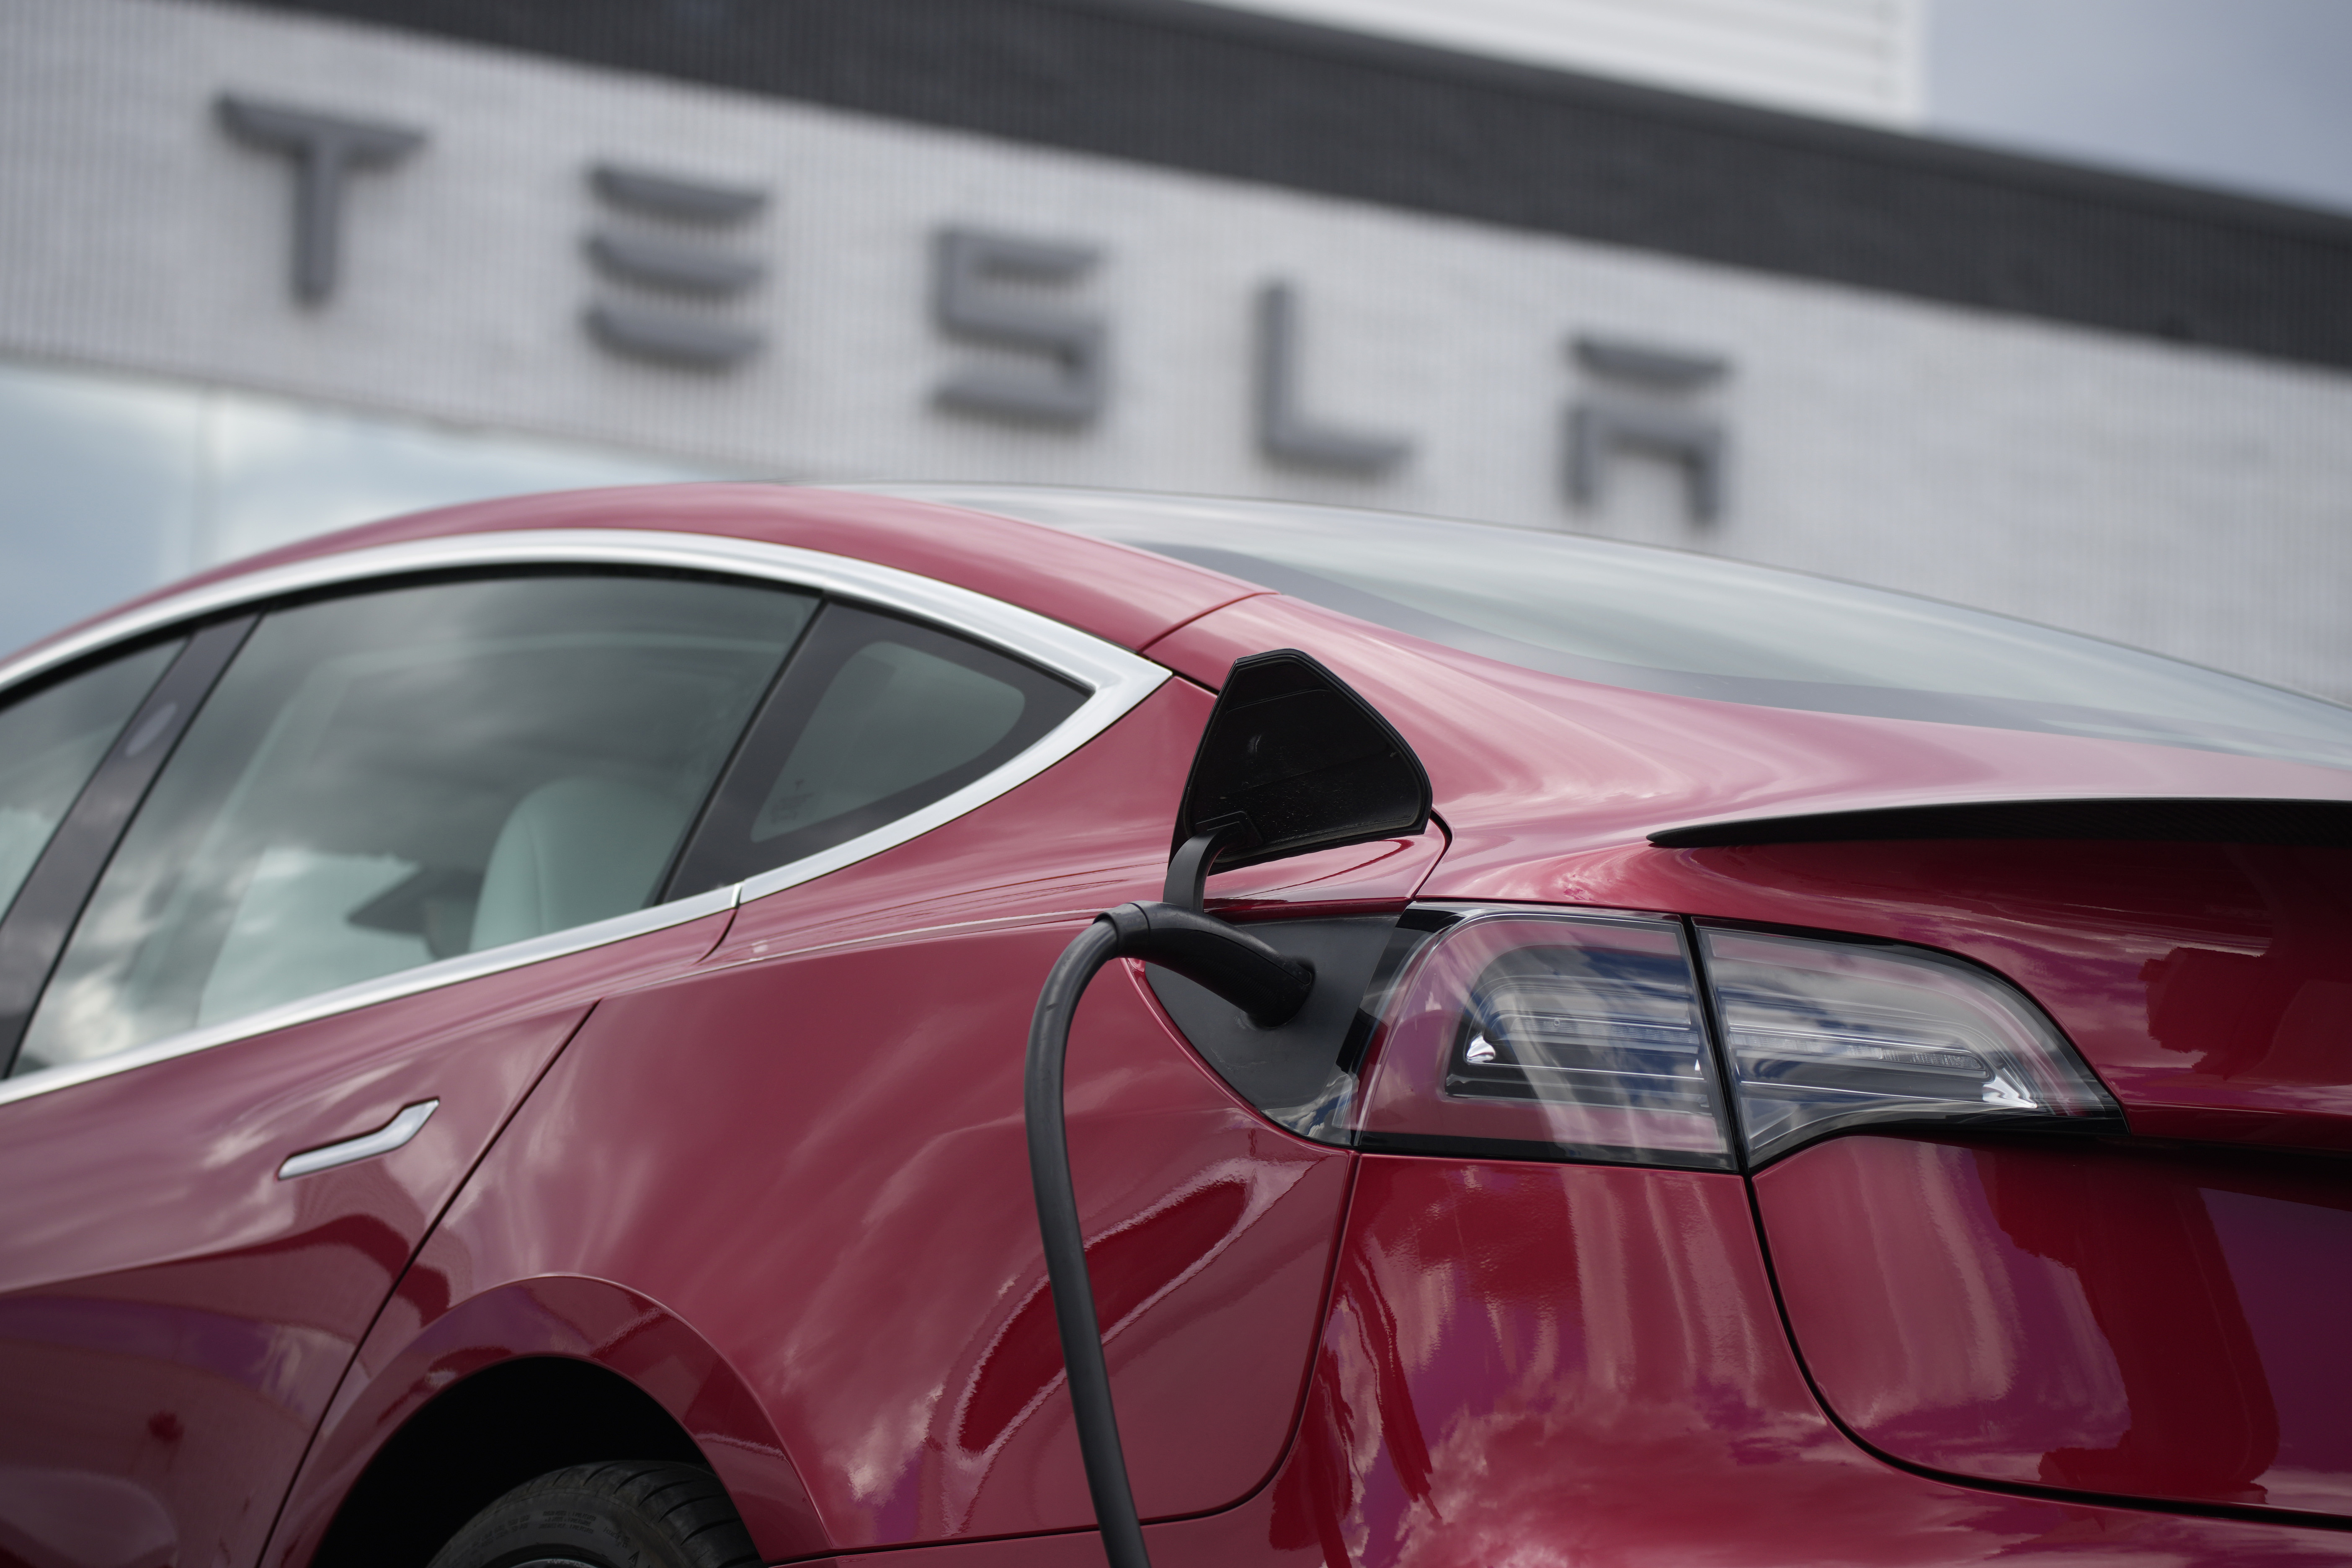 Tesla recalls more than 1 million vehicles over faulty power